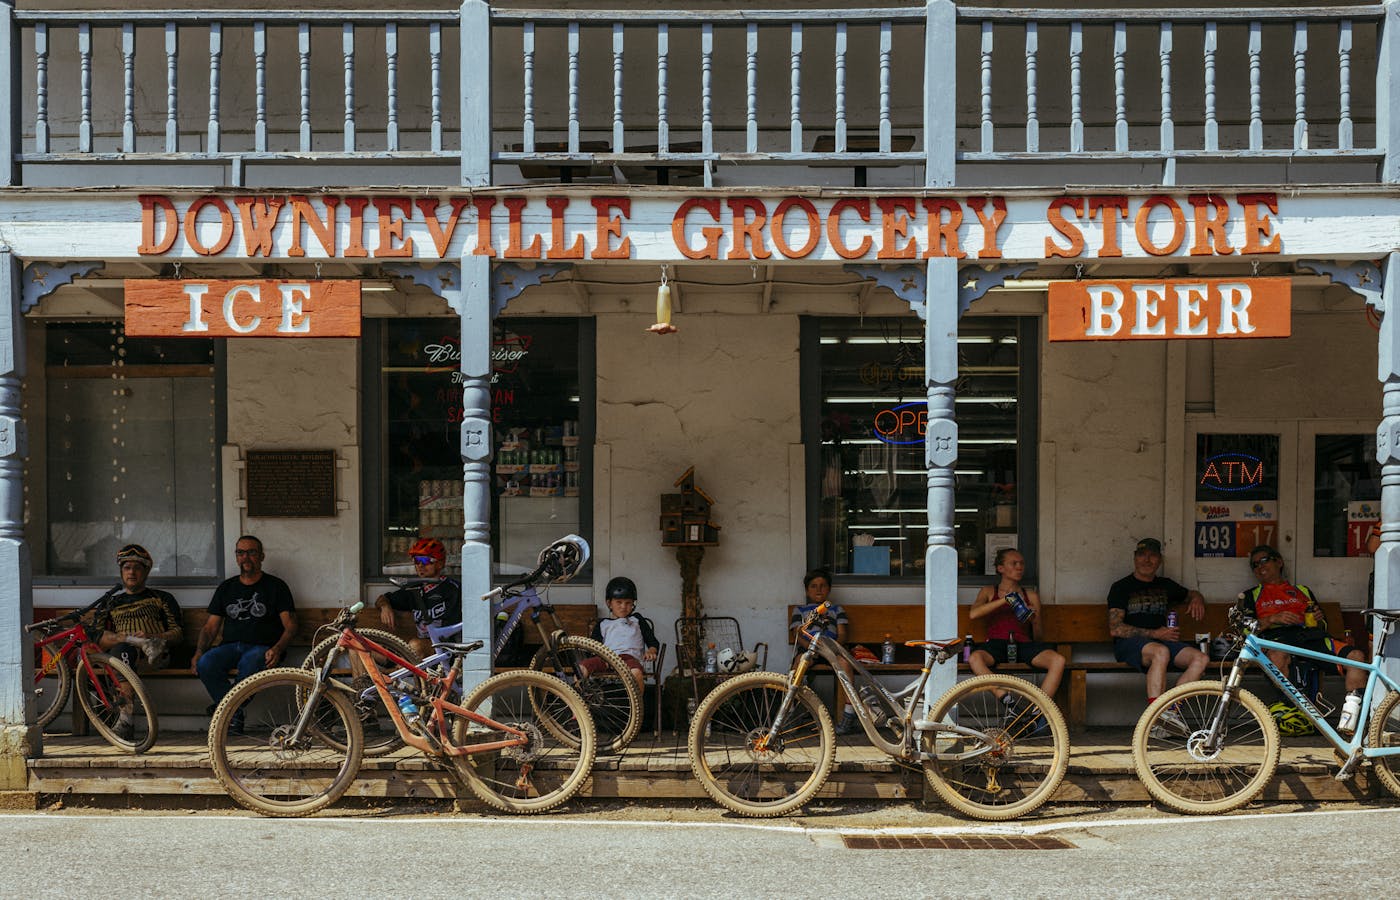 The Downieville Grocery Store is the main stop for rest and provisions when you get back from a ride. (Photo credit: Ken Etzel)